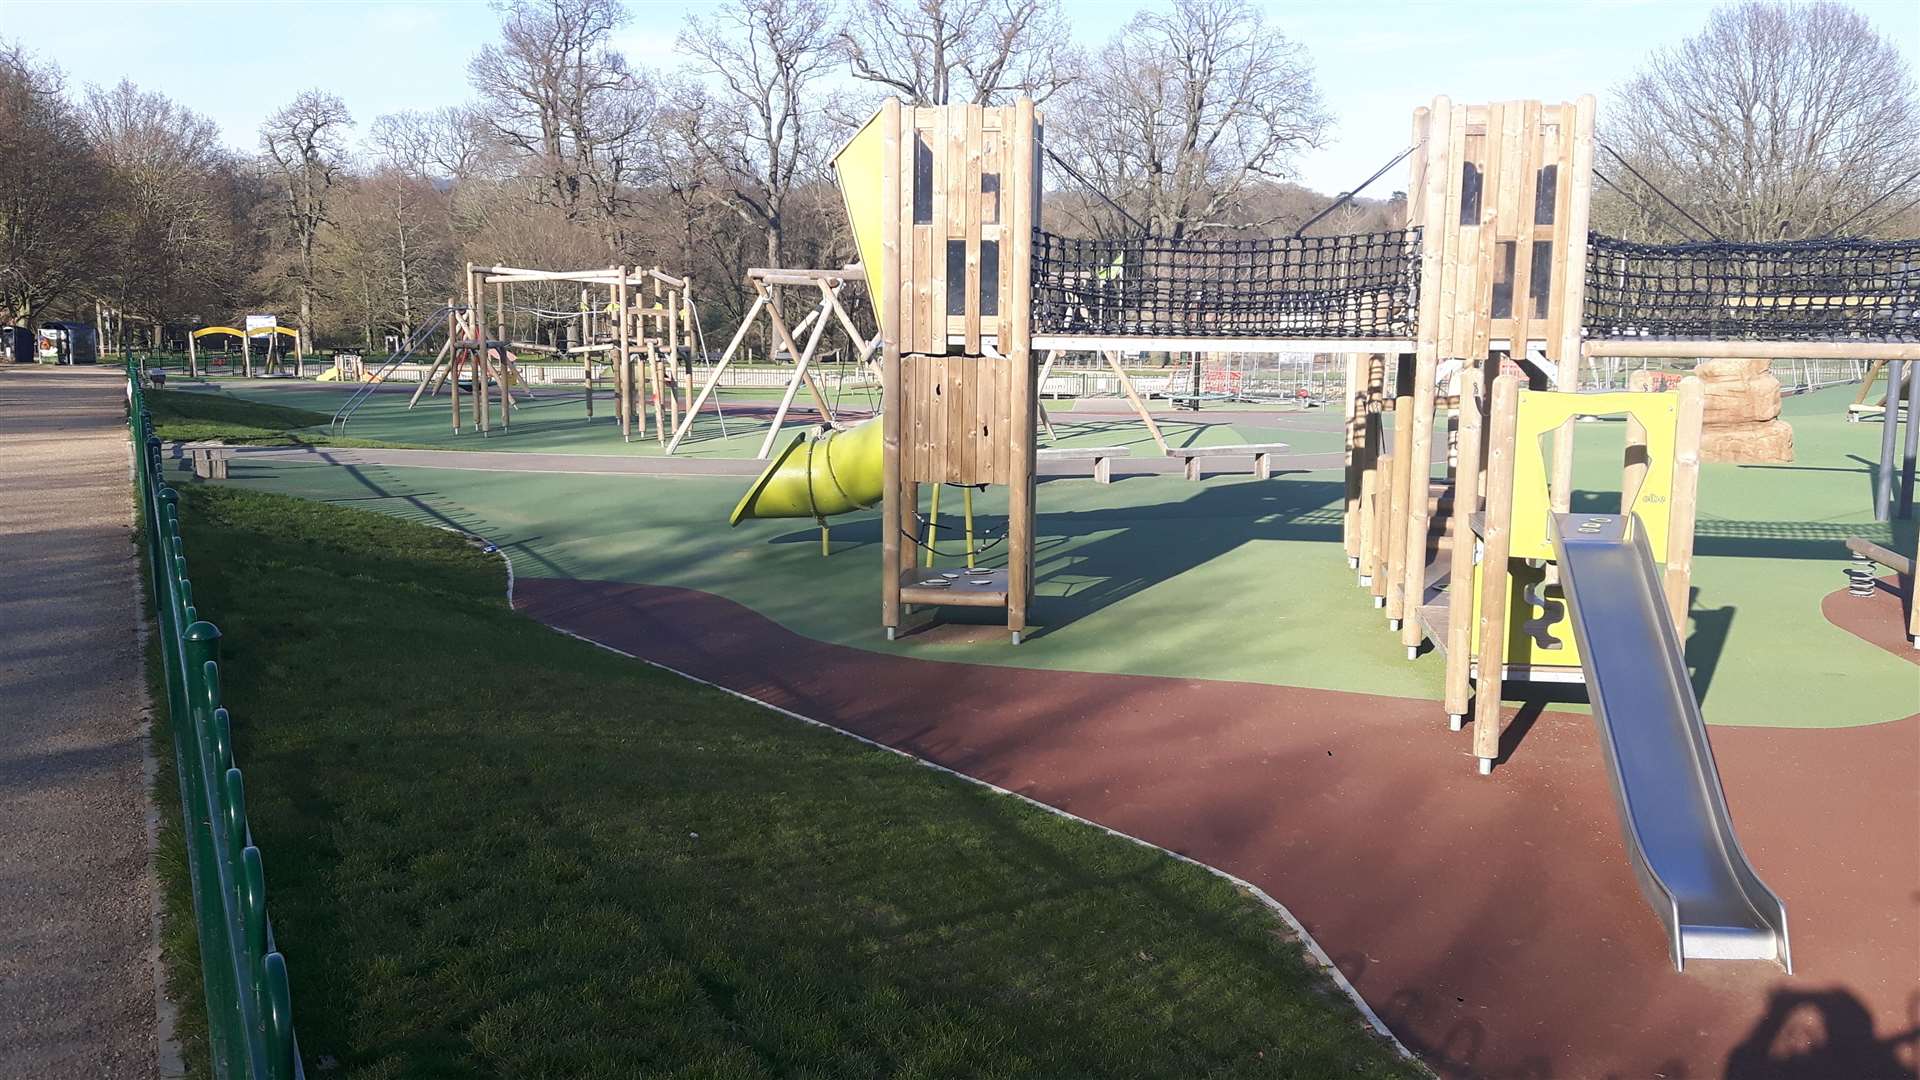 The children's play area at Mote Park is amongst those which is expected to reopen on Saturday, July 4